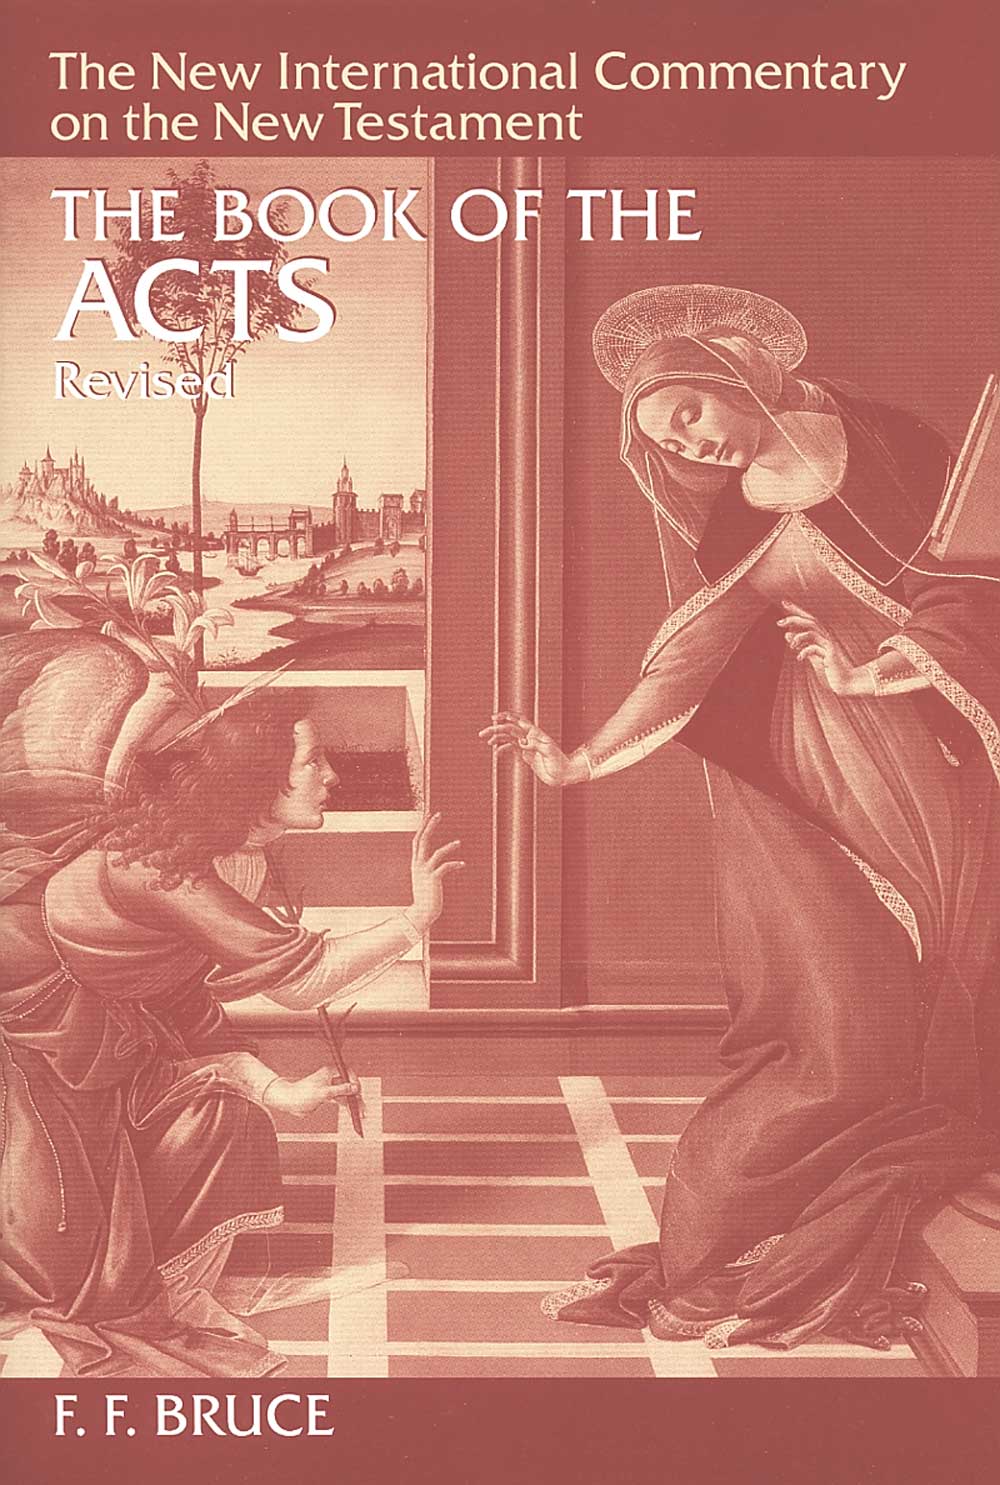 The Book of Acts - F. F. Bruce,,